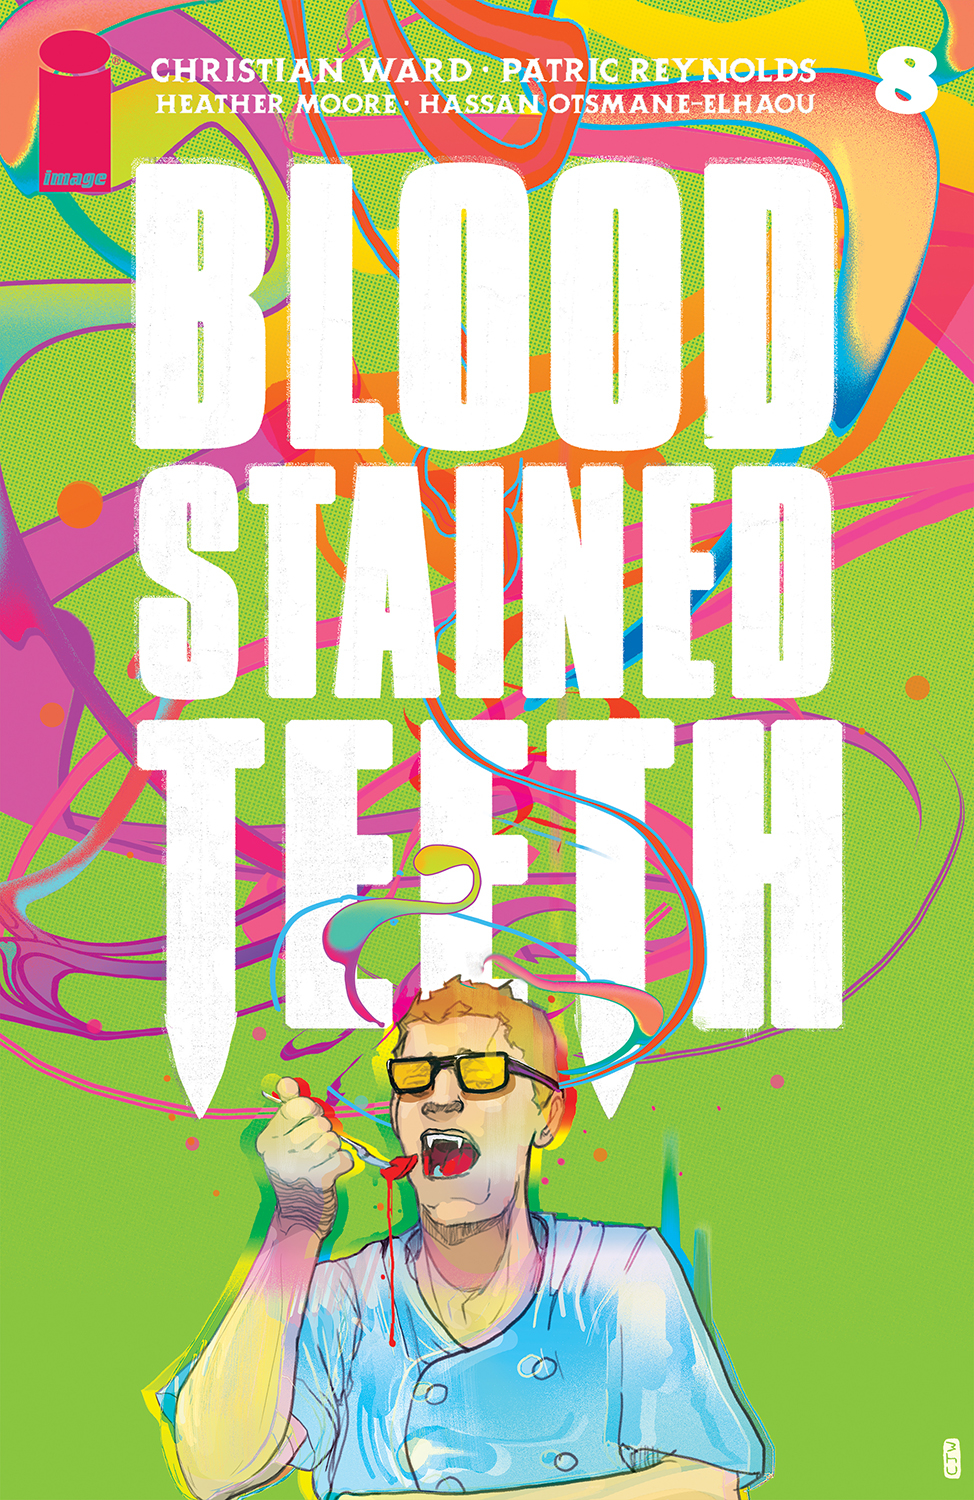 Blood Stained Teeth #8 Cover A Ward (Mature)